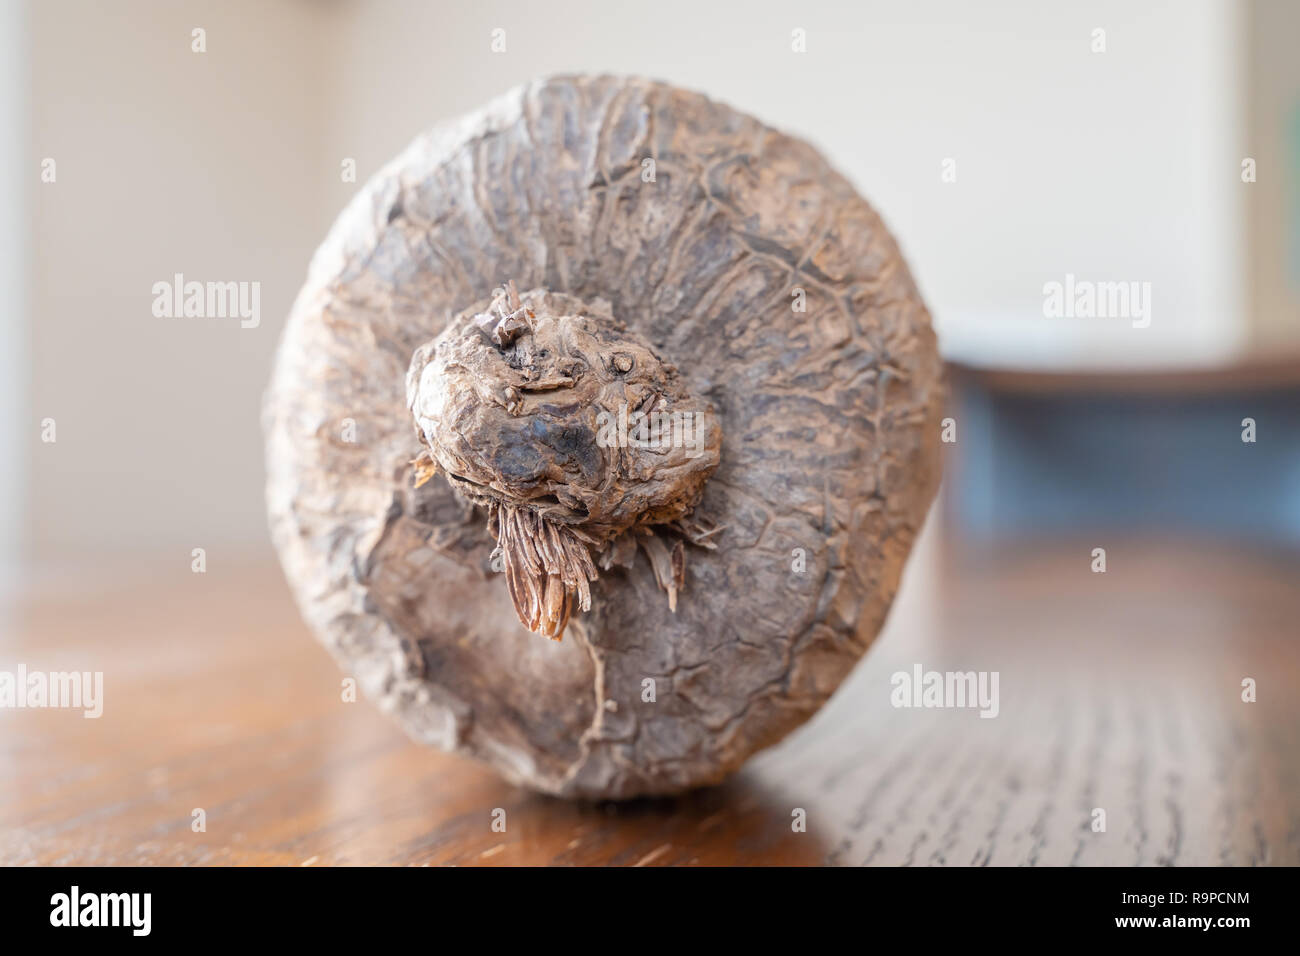 A Tuber of Nigerian Yam ready for cooking Stock Photo